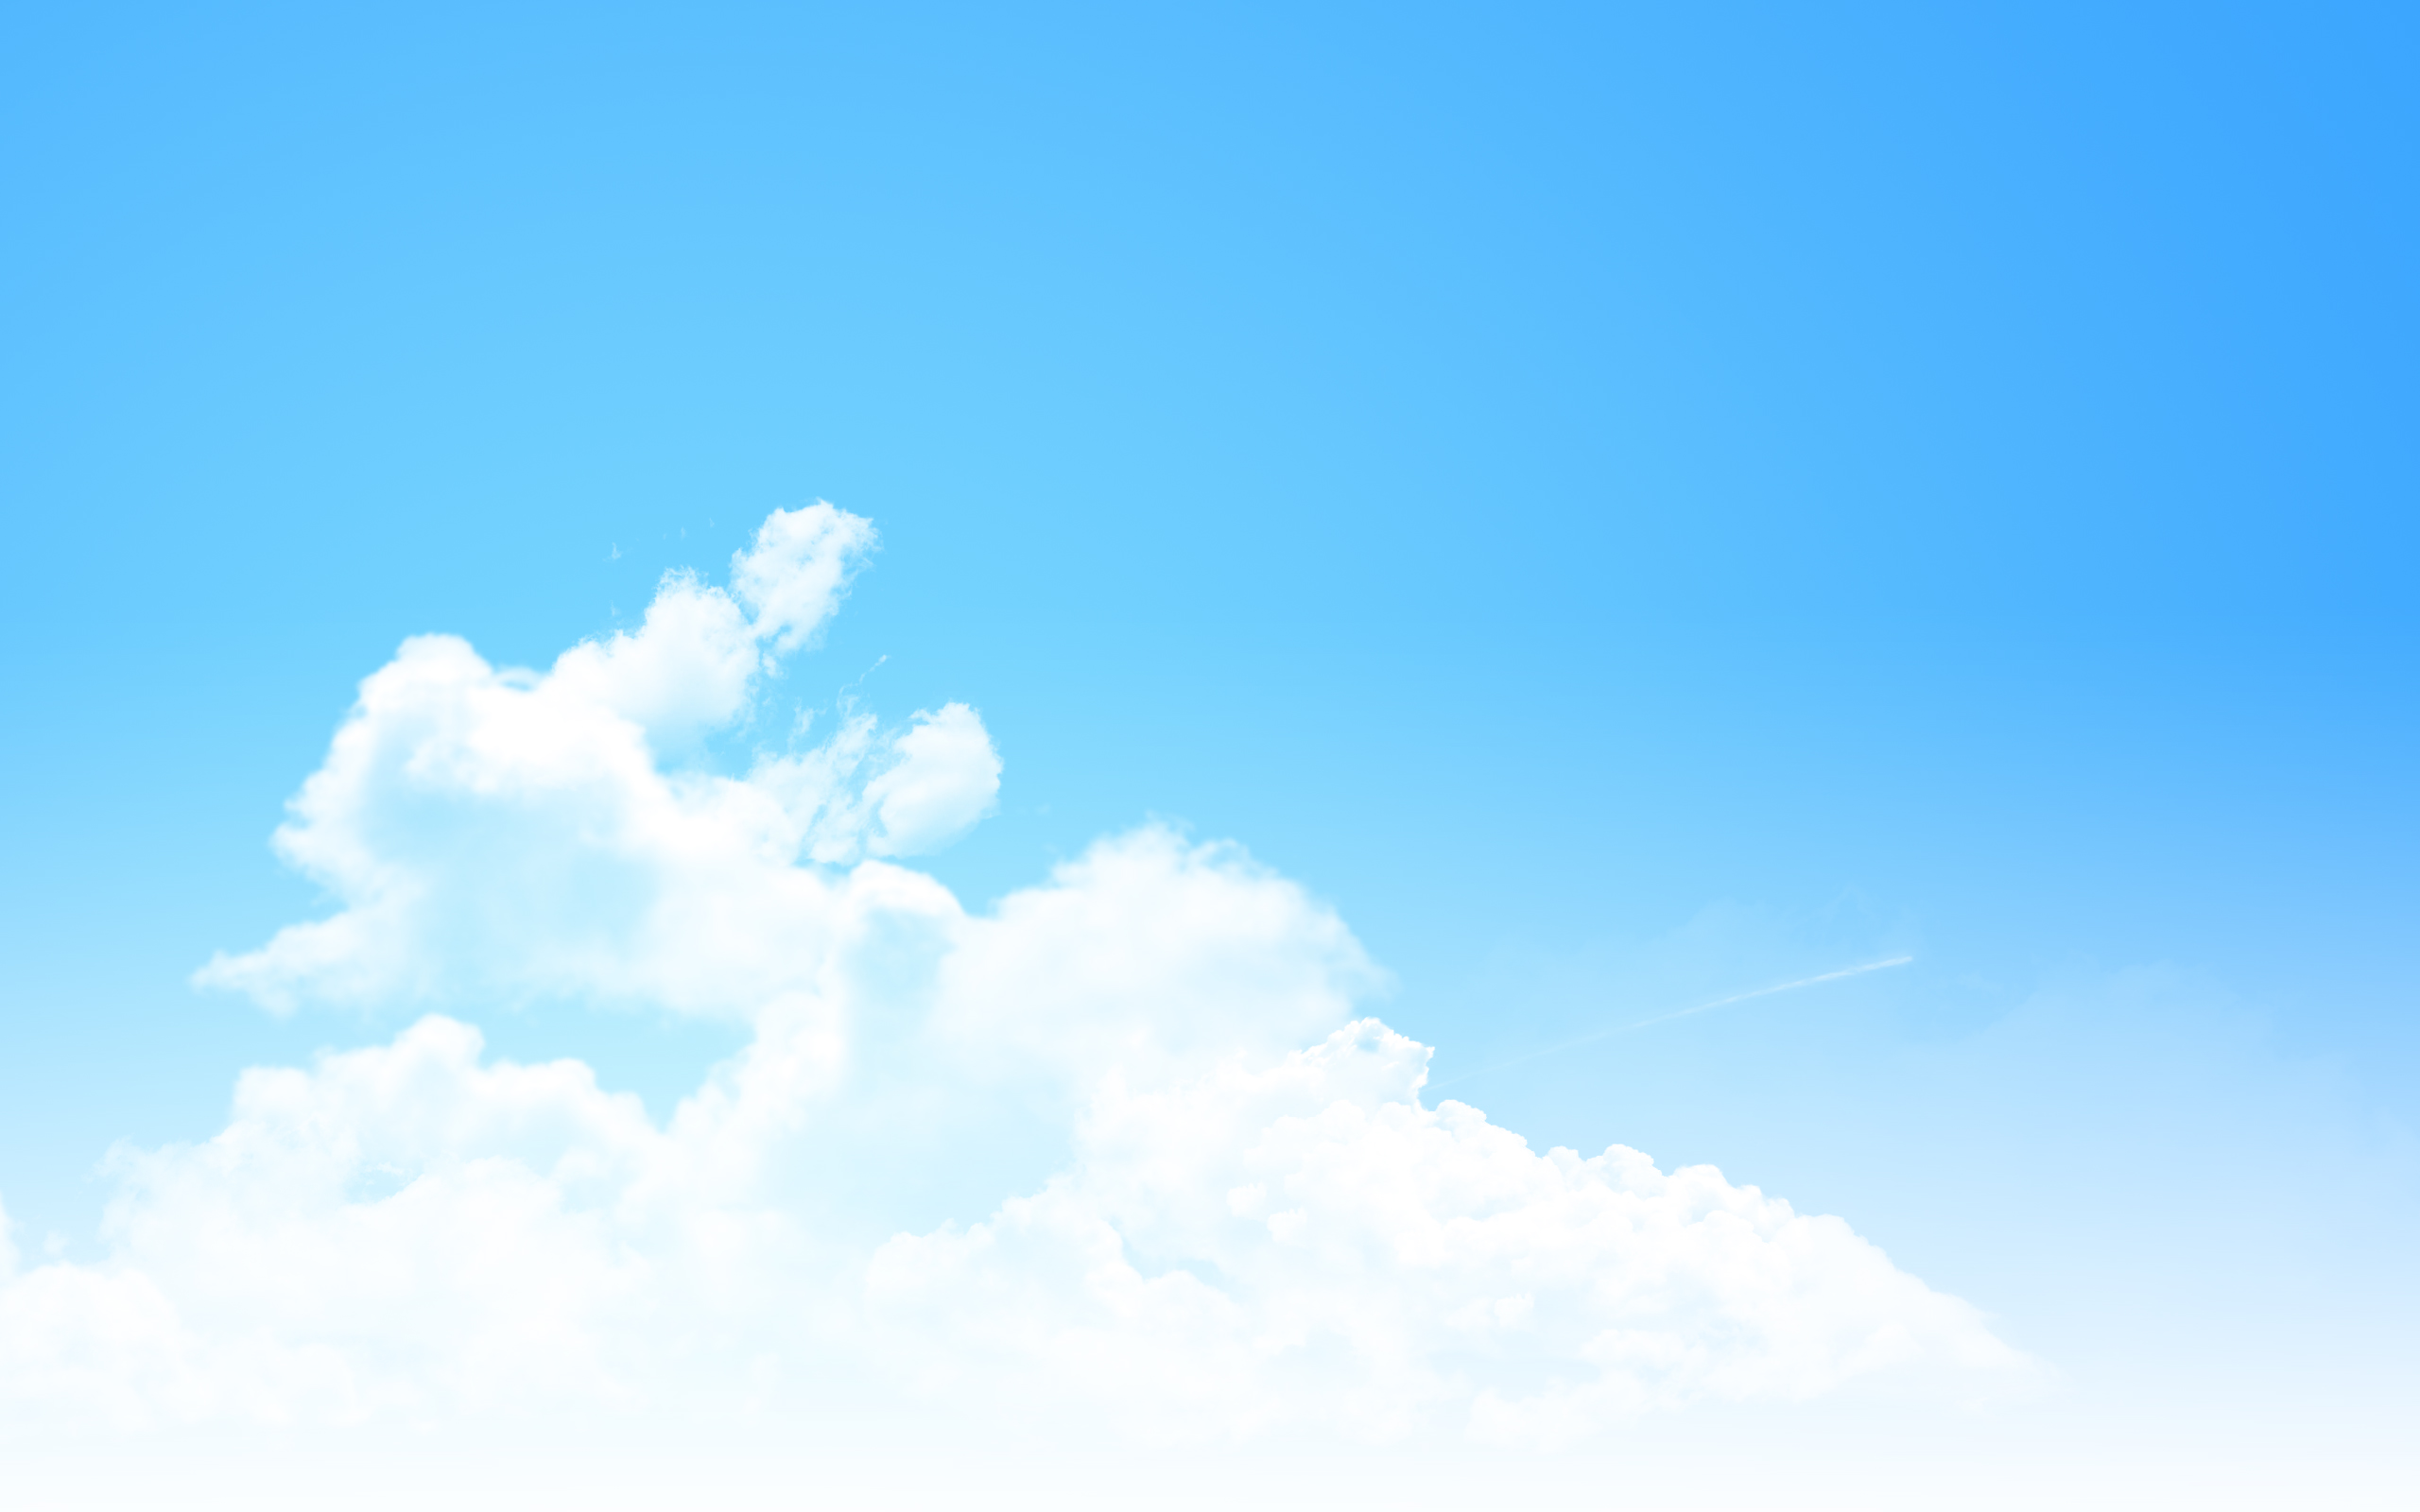 Clouds And Blue Sky Background Hd Wallpapers 2560 X 1600 2 Jpg The Young Broke Traveler